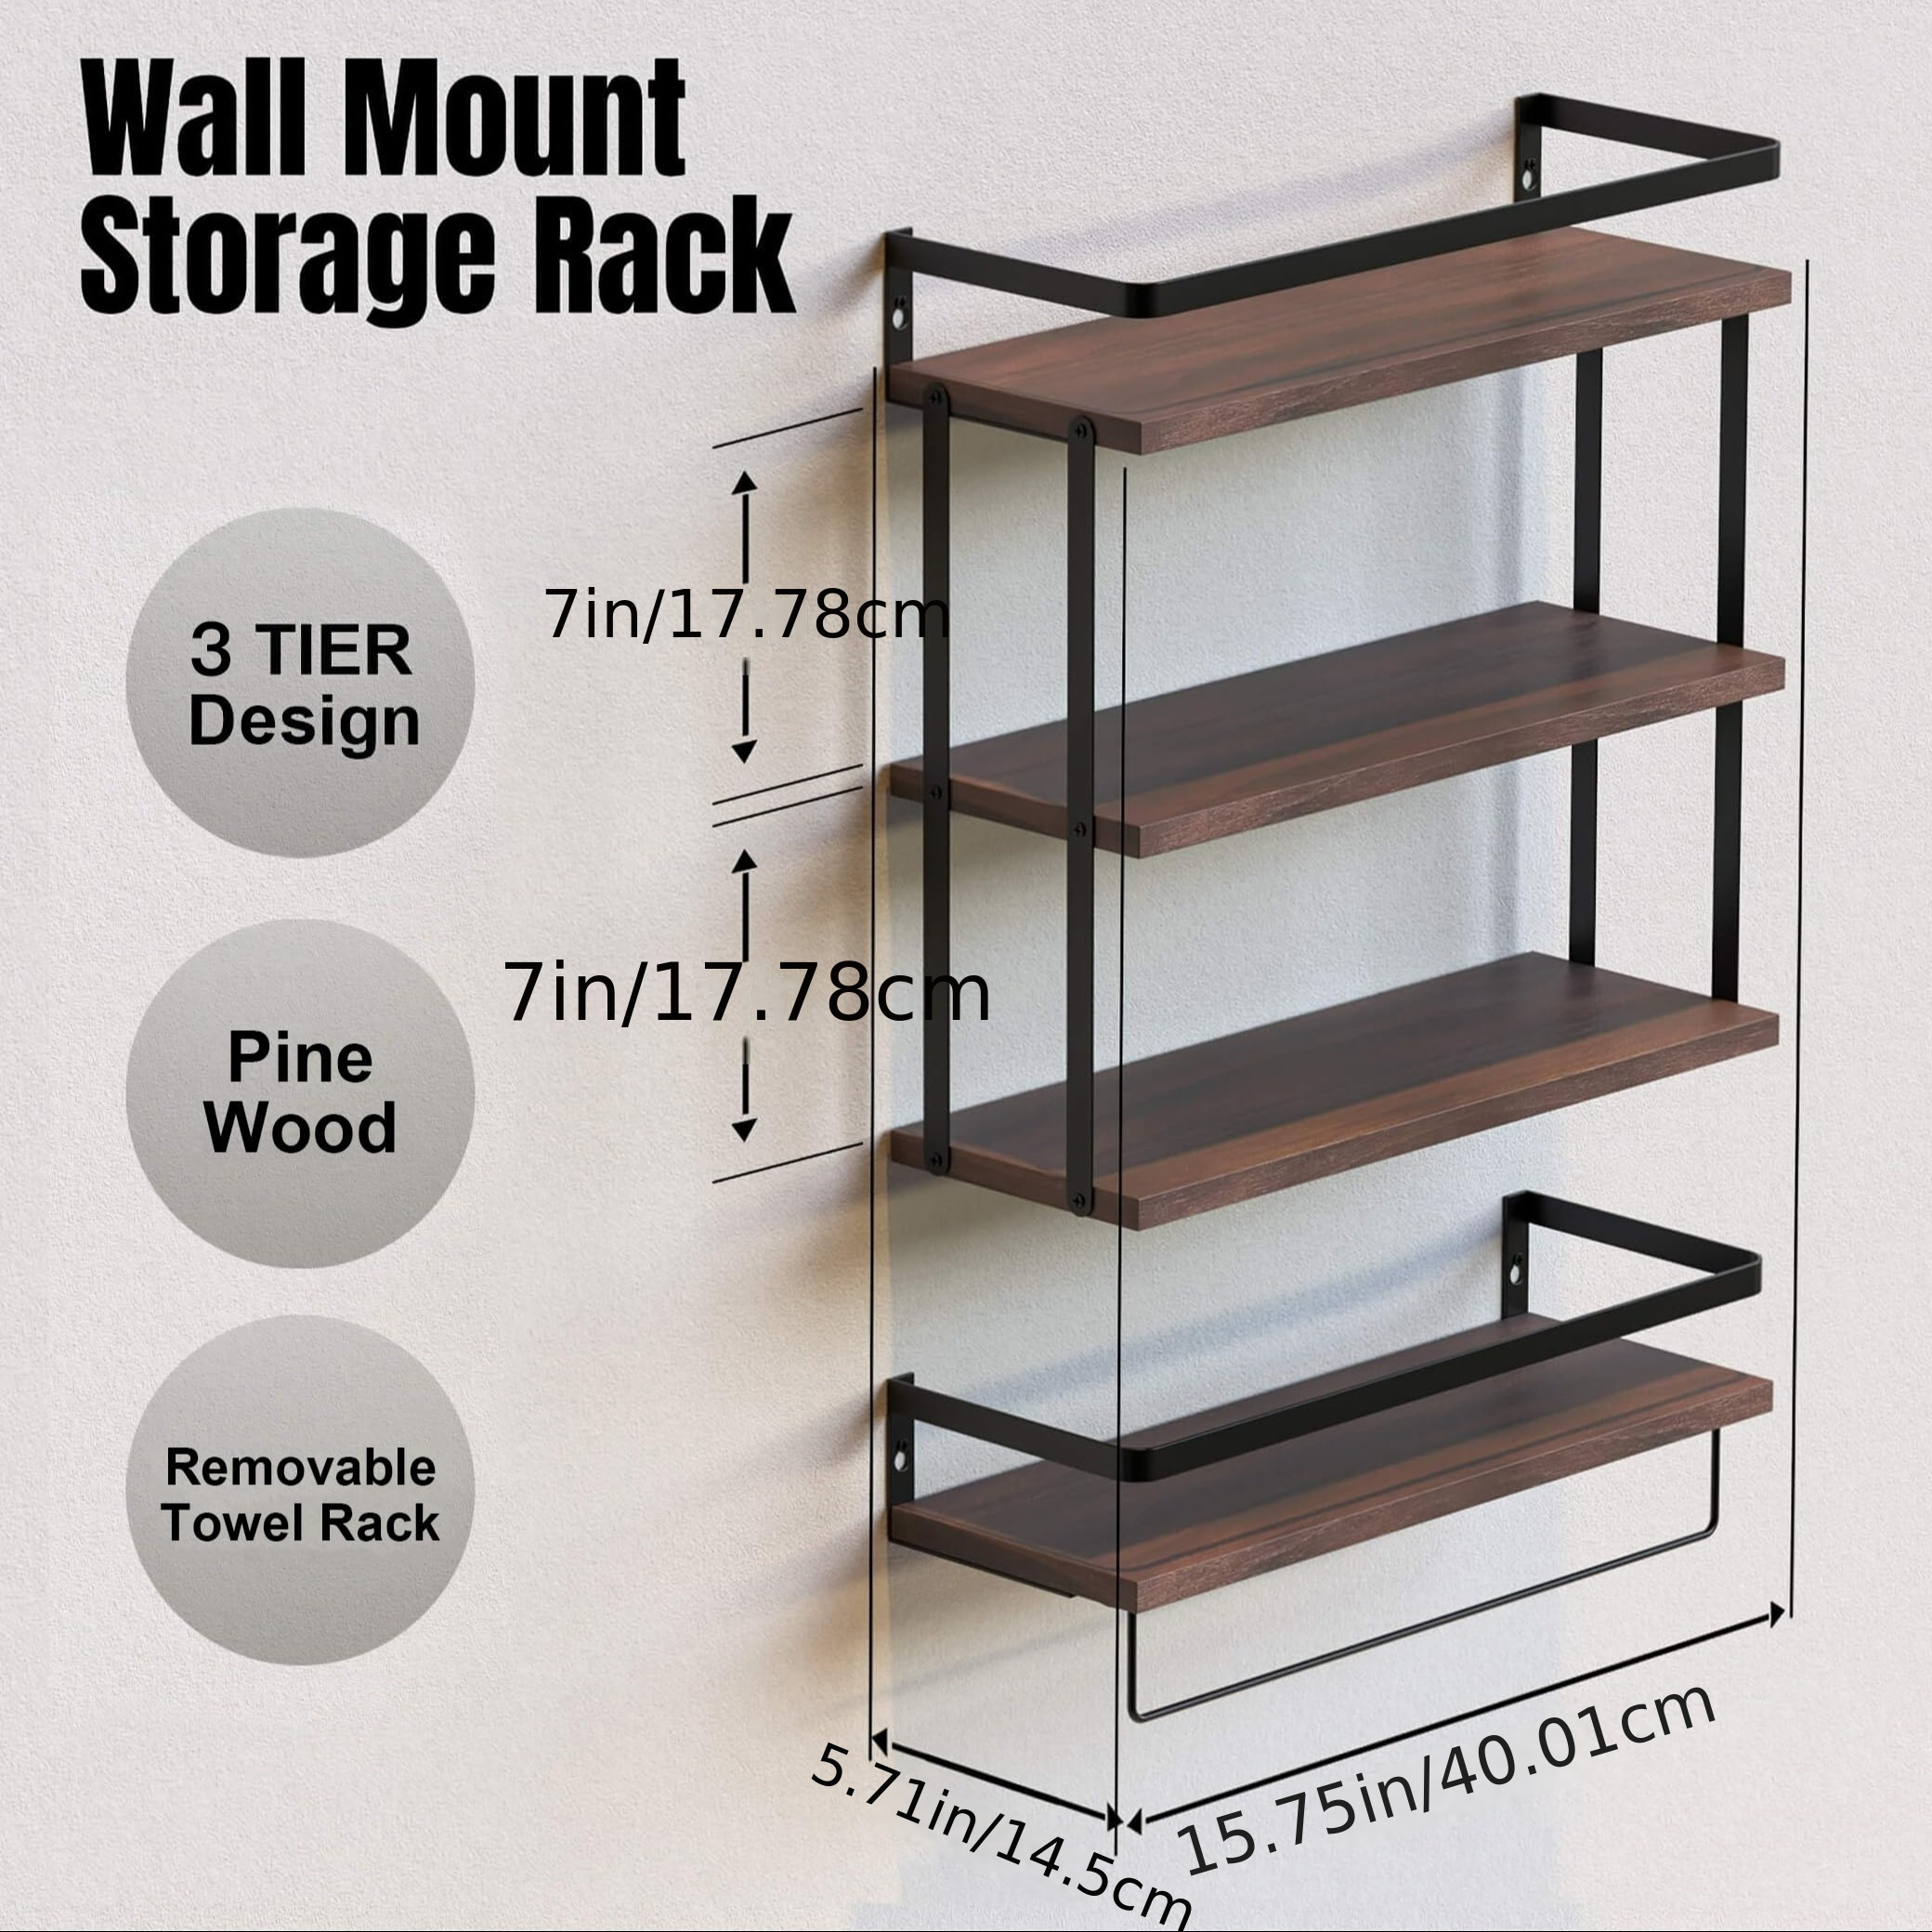 

House 3+1 Tier Wall Mounted Floating Shelves Set Of 2, Rustic Wood Wall Shelf With Metal Frame, Extra Storage Rack For Bathroom, Kitchen, Bedroom With Tissue Rack & Towel Bar - Rustic Brown